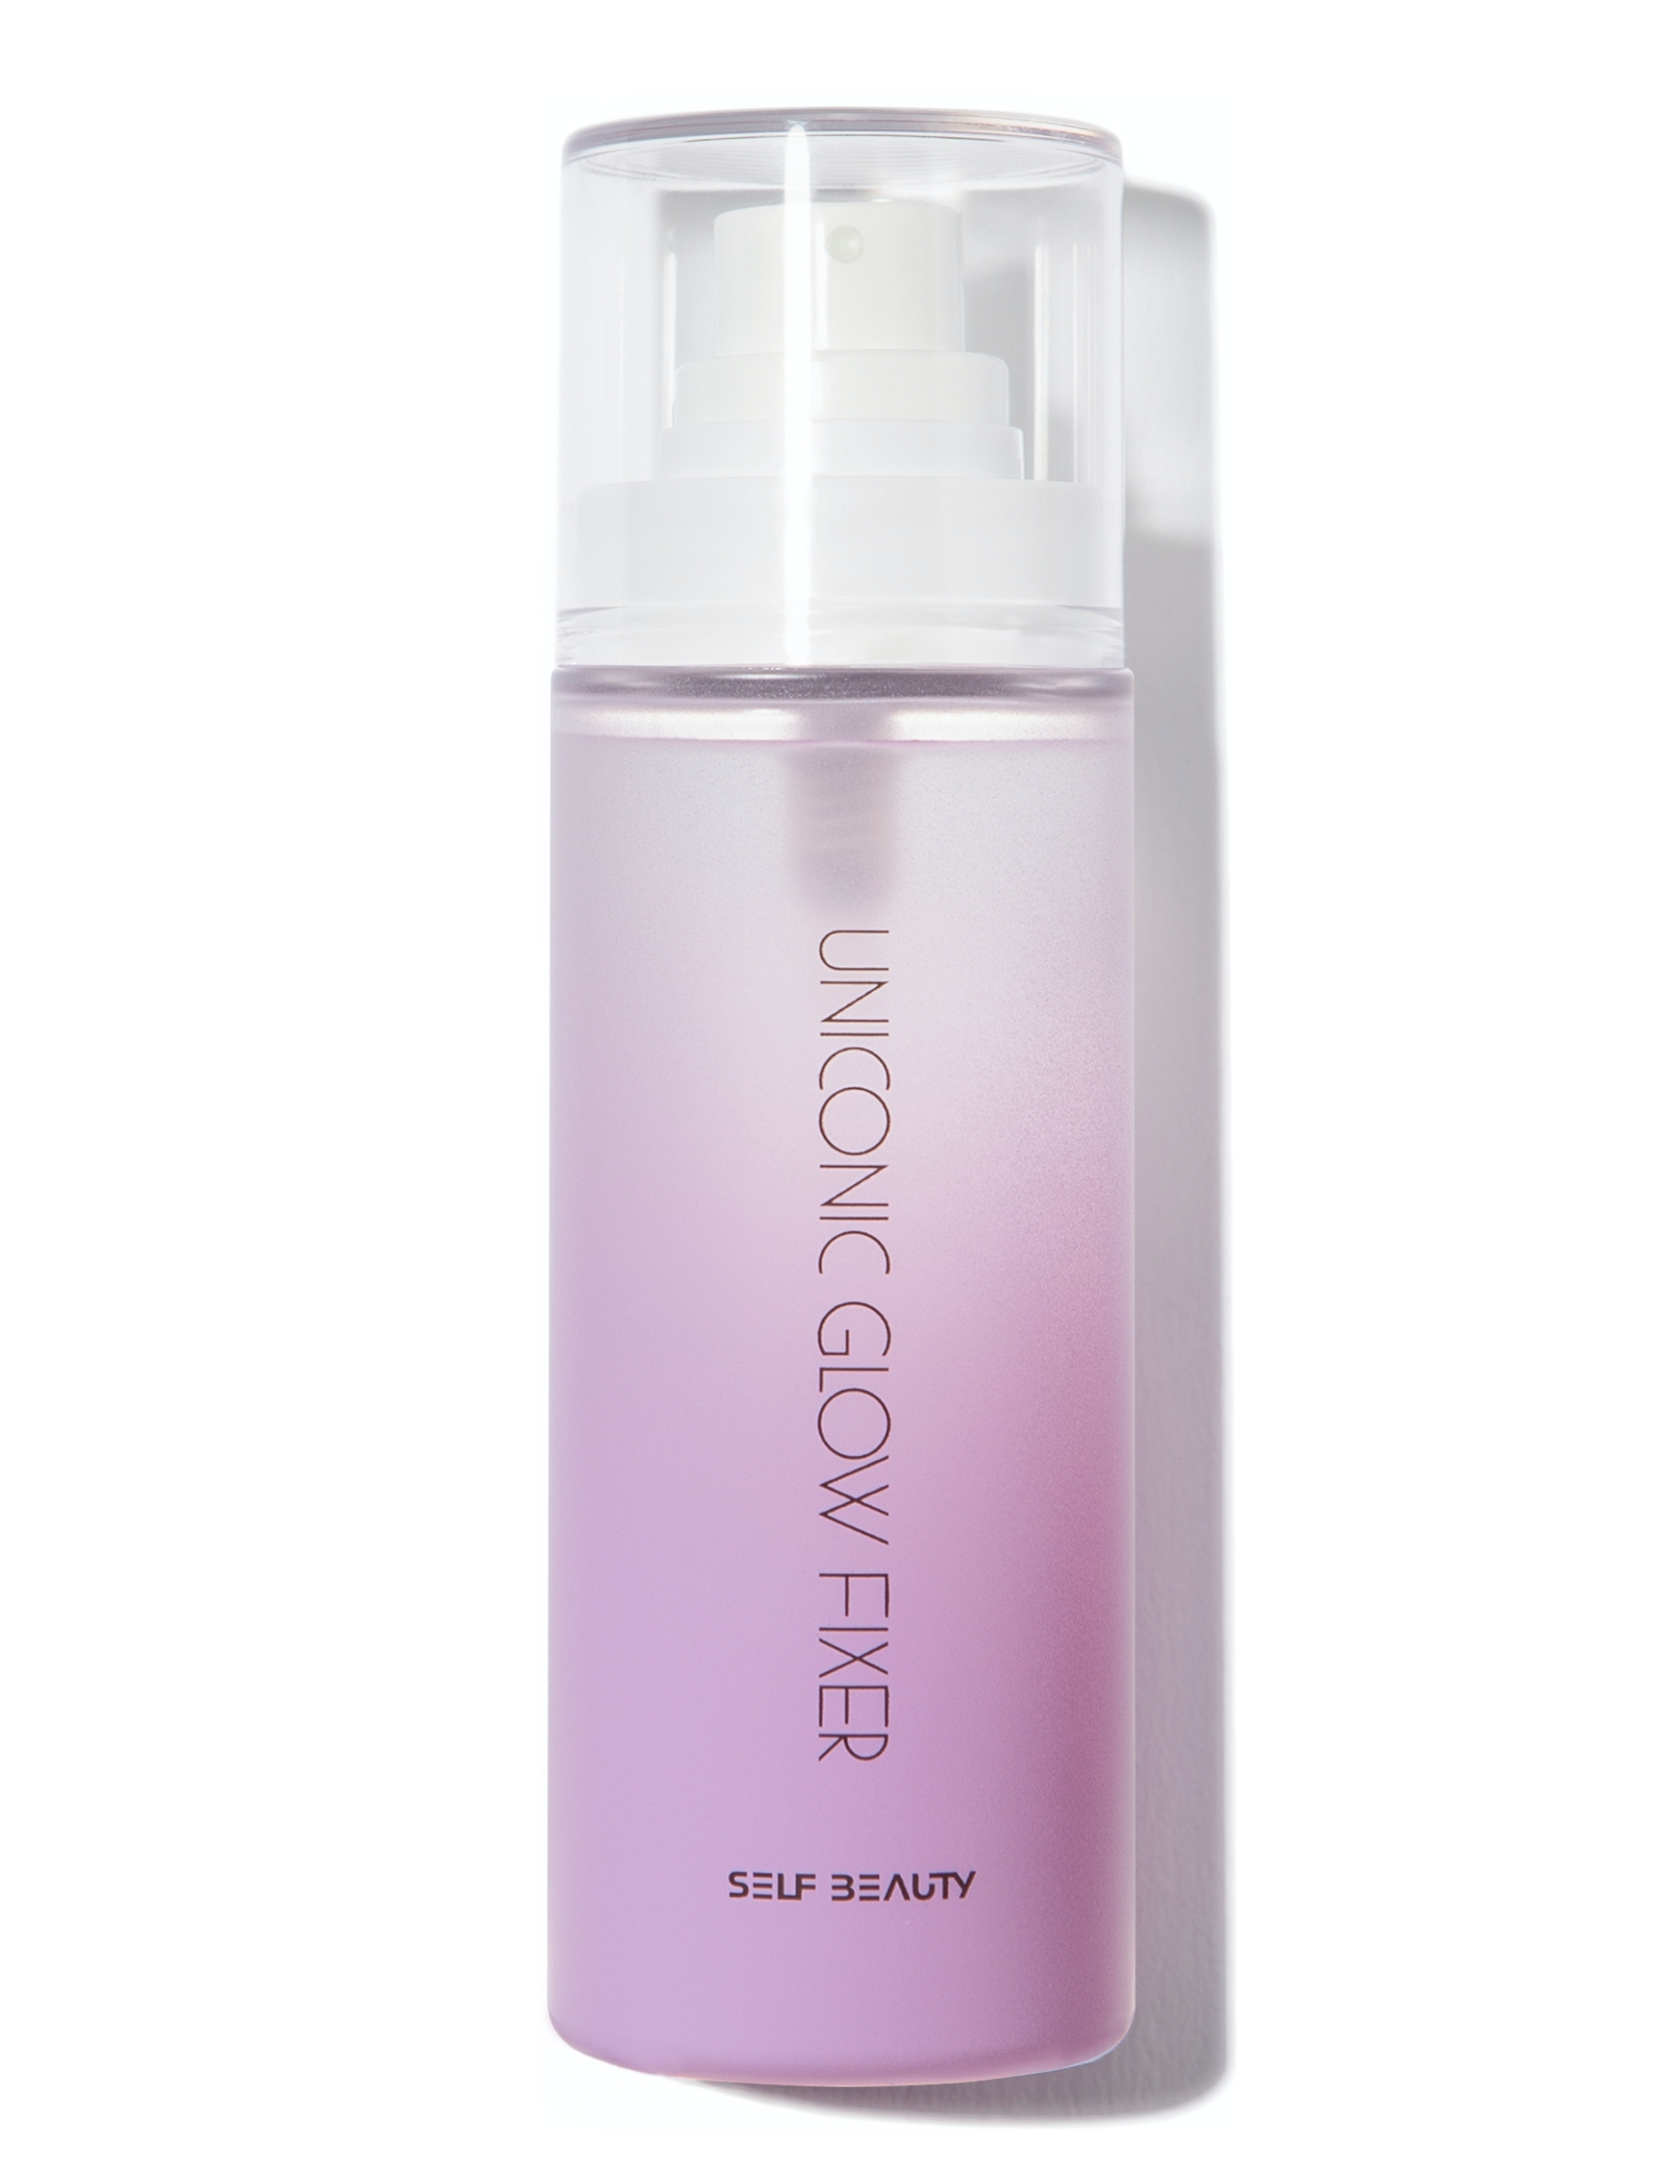 UNICONIC Glow Makeup Setting Spray for Face